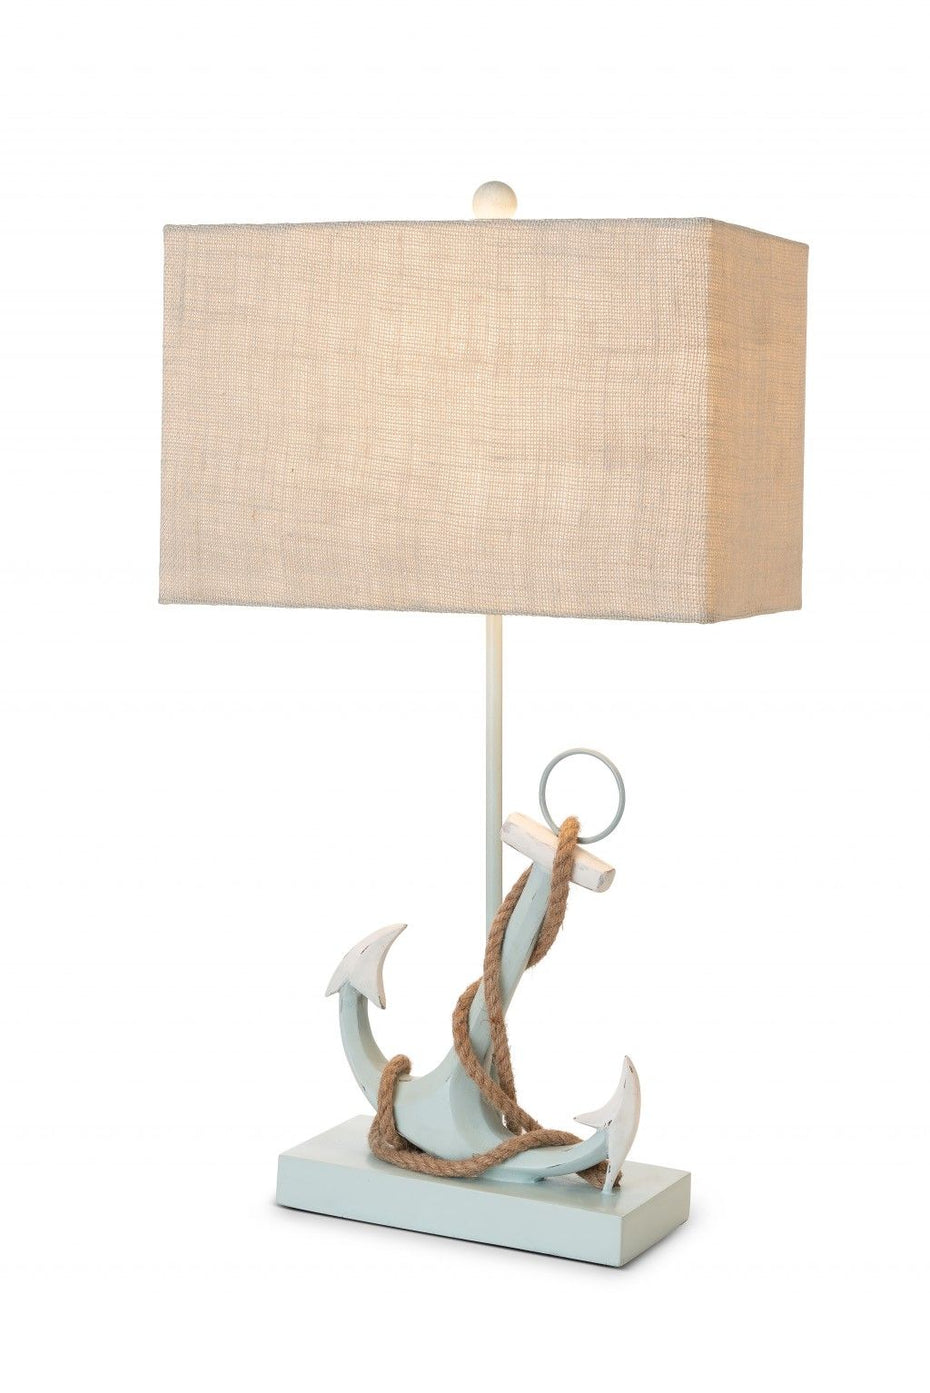 Anchor Table Lamps (Set of 2) - Blue And White